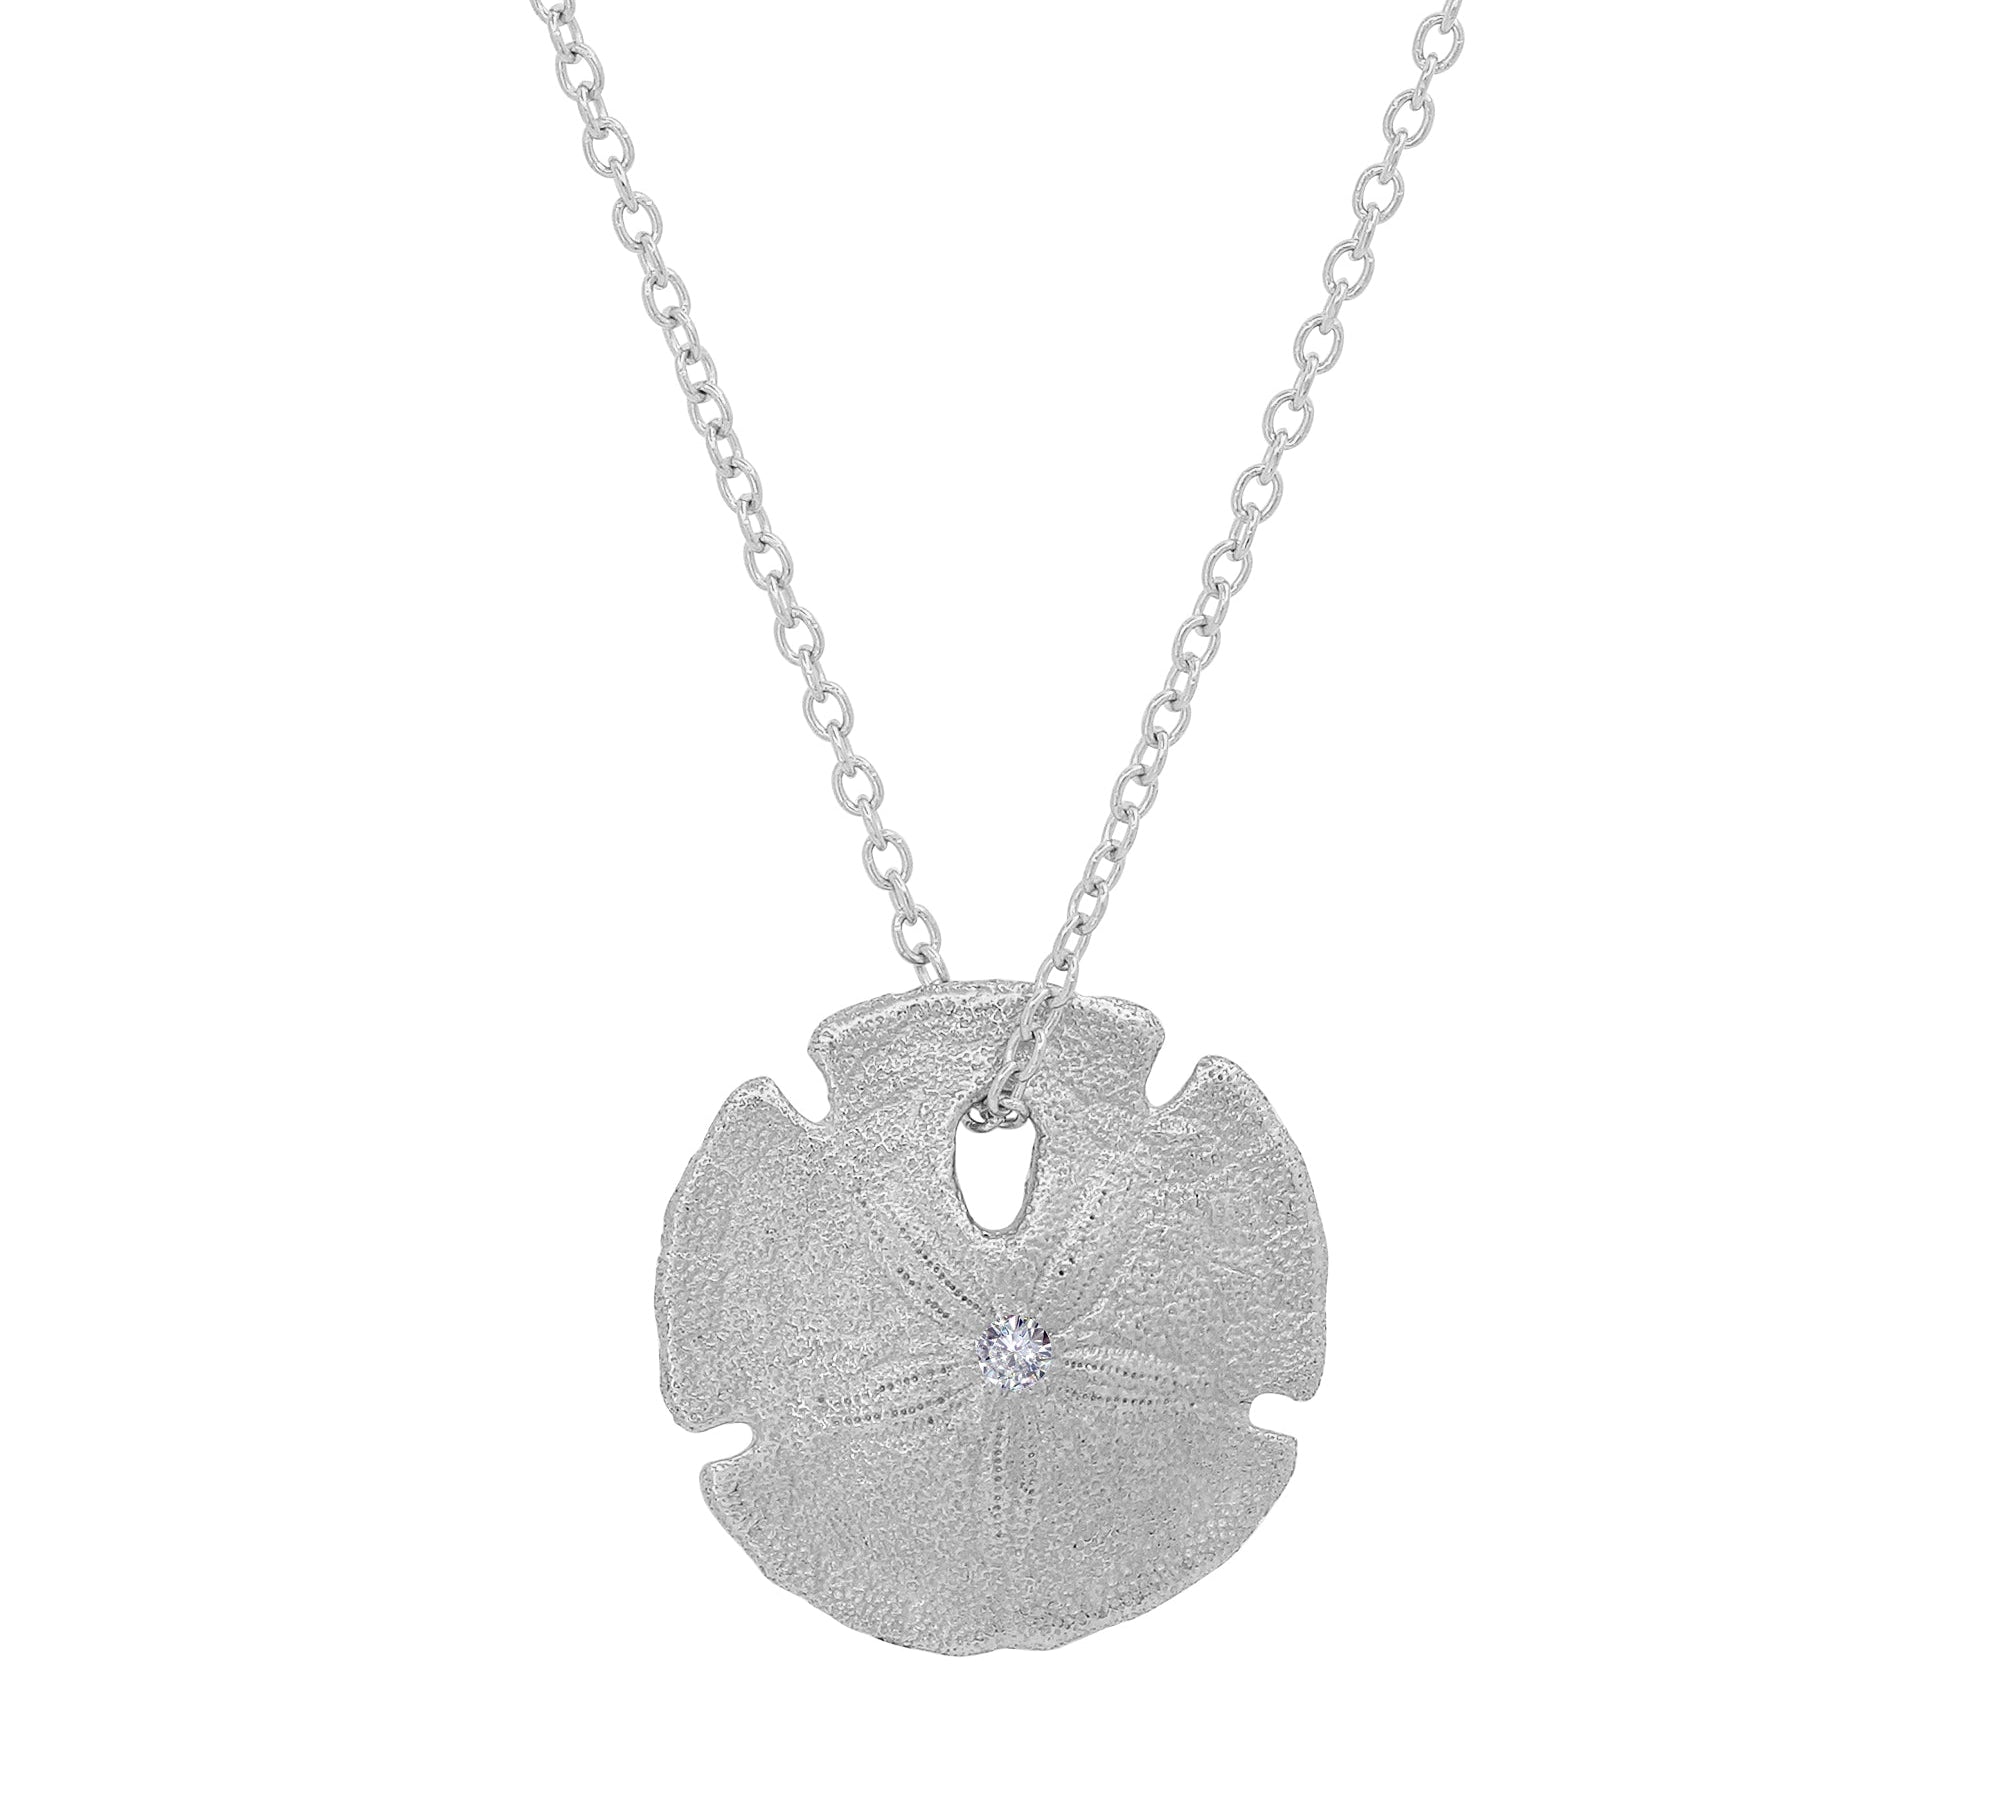 Small Sand Dollar Necklace Pendant Elisabeth Bell Jewelry White Gold  